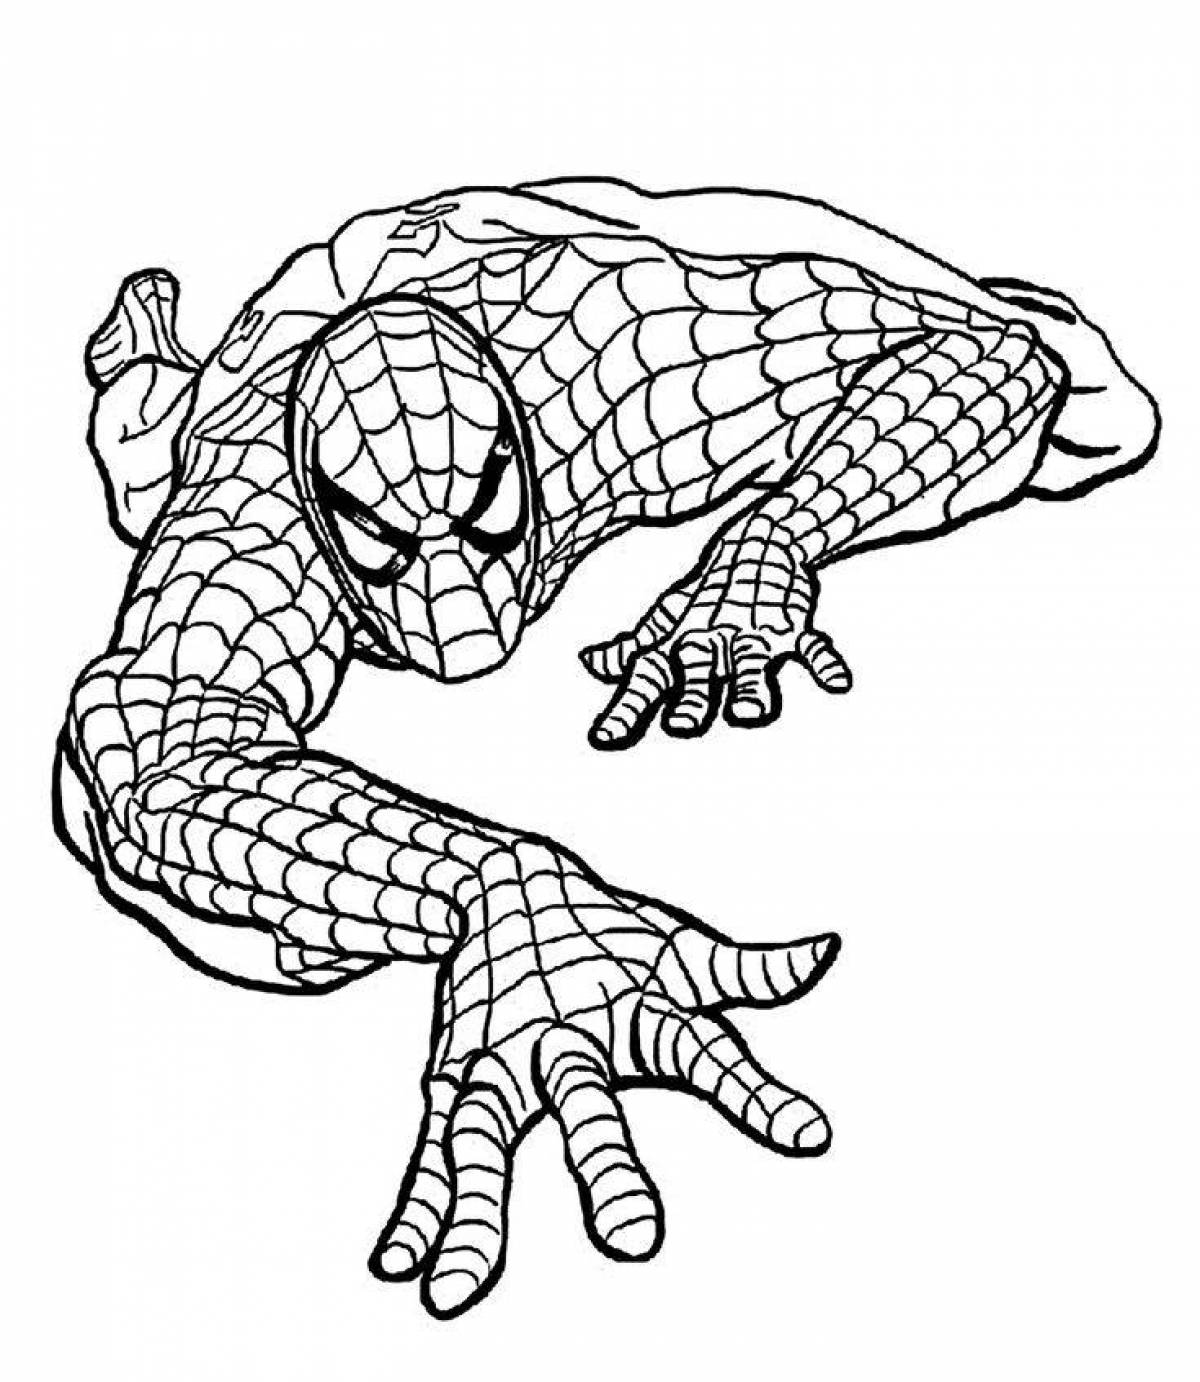 Comic spiderman coloring page for boys